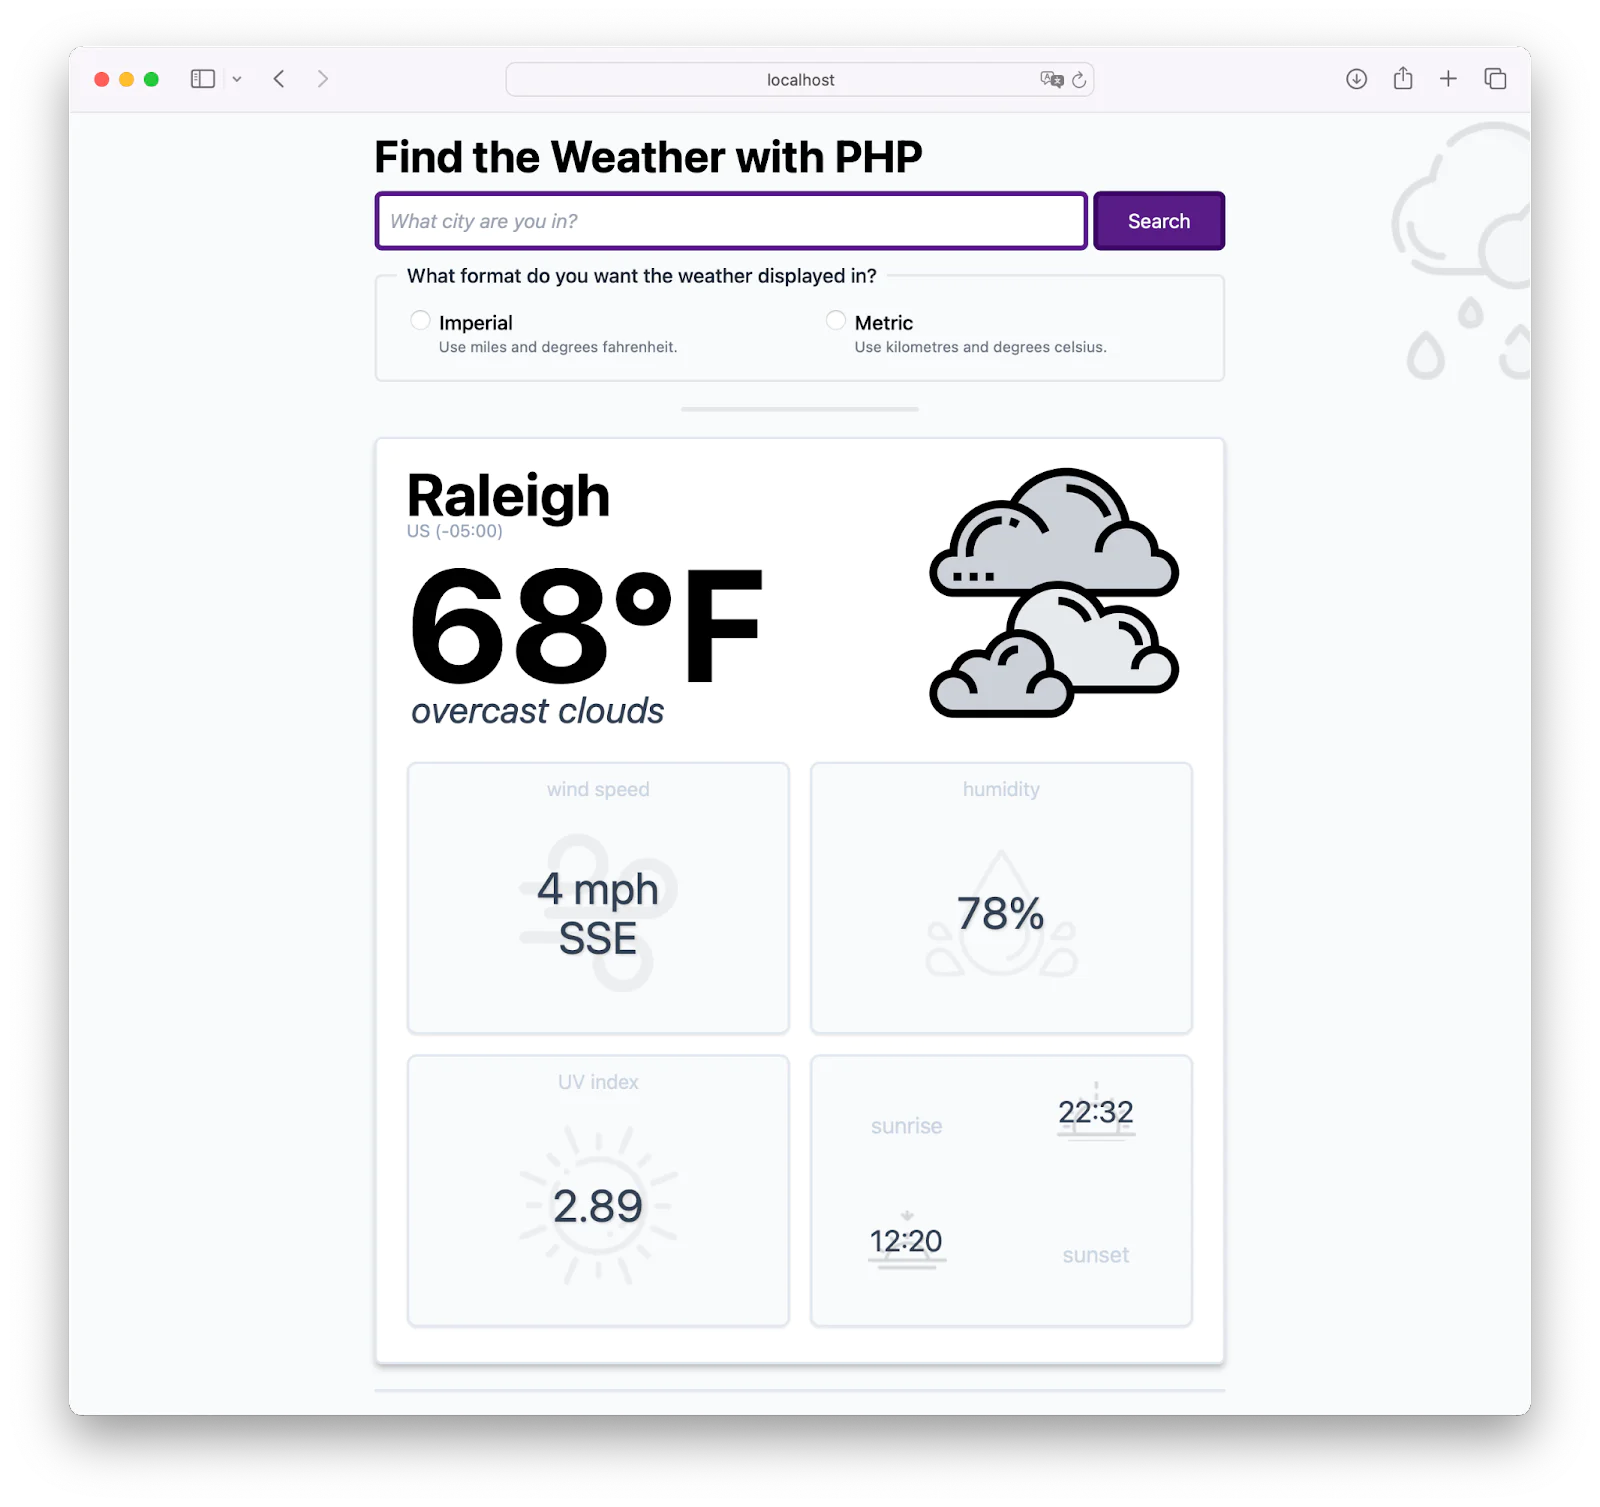 The PHP weather application, rendered in the Safari web browser, with weather data for Raleigh, North Carolina, USA. It has a field to enter a city name to find the weather for at the top of the page, and a radio button for choosing either imperial or metric as the unit of measurement for the weather data. Under that, it displays the weather data, including the temperature in degrees Fahrenheit and wind speed.